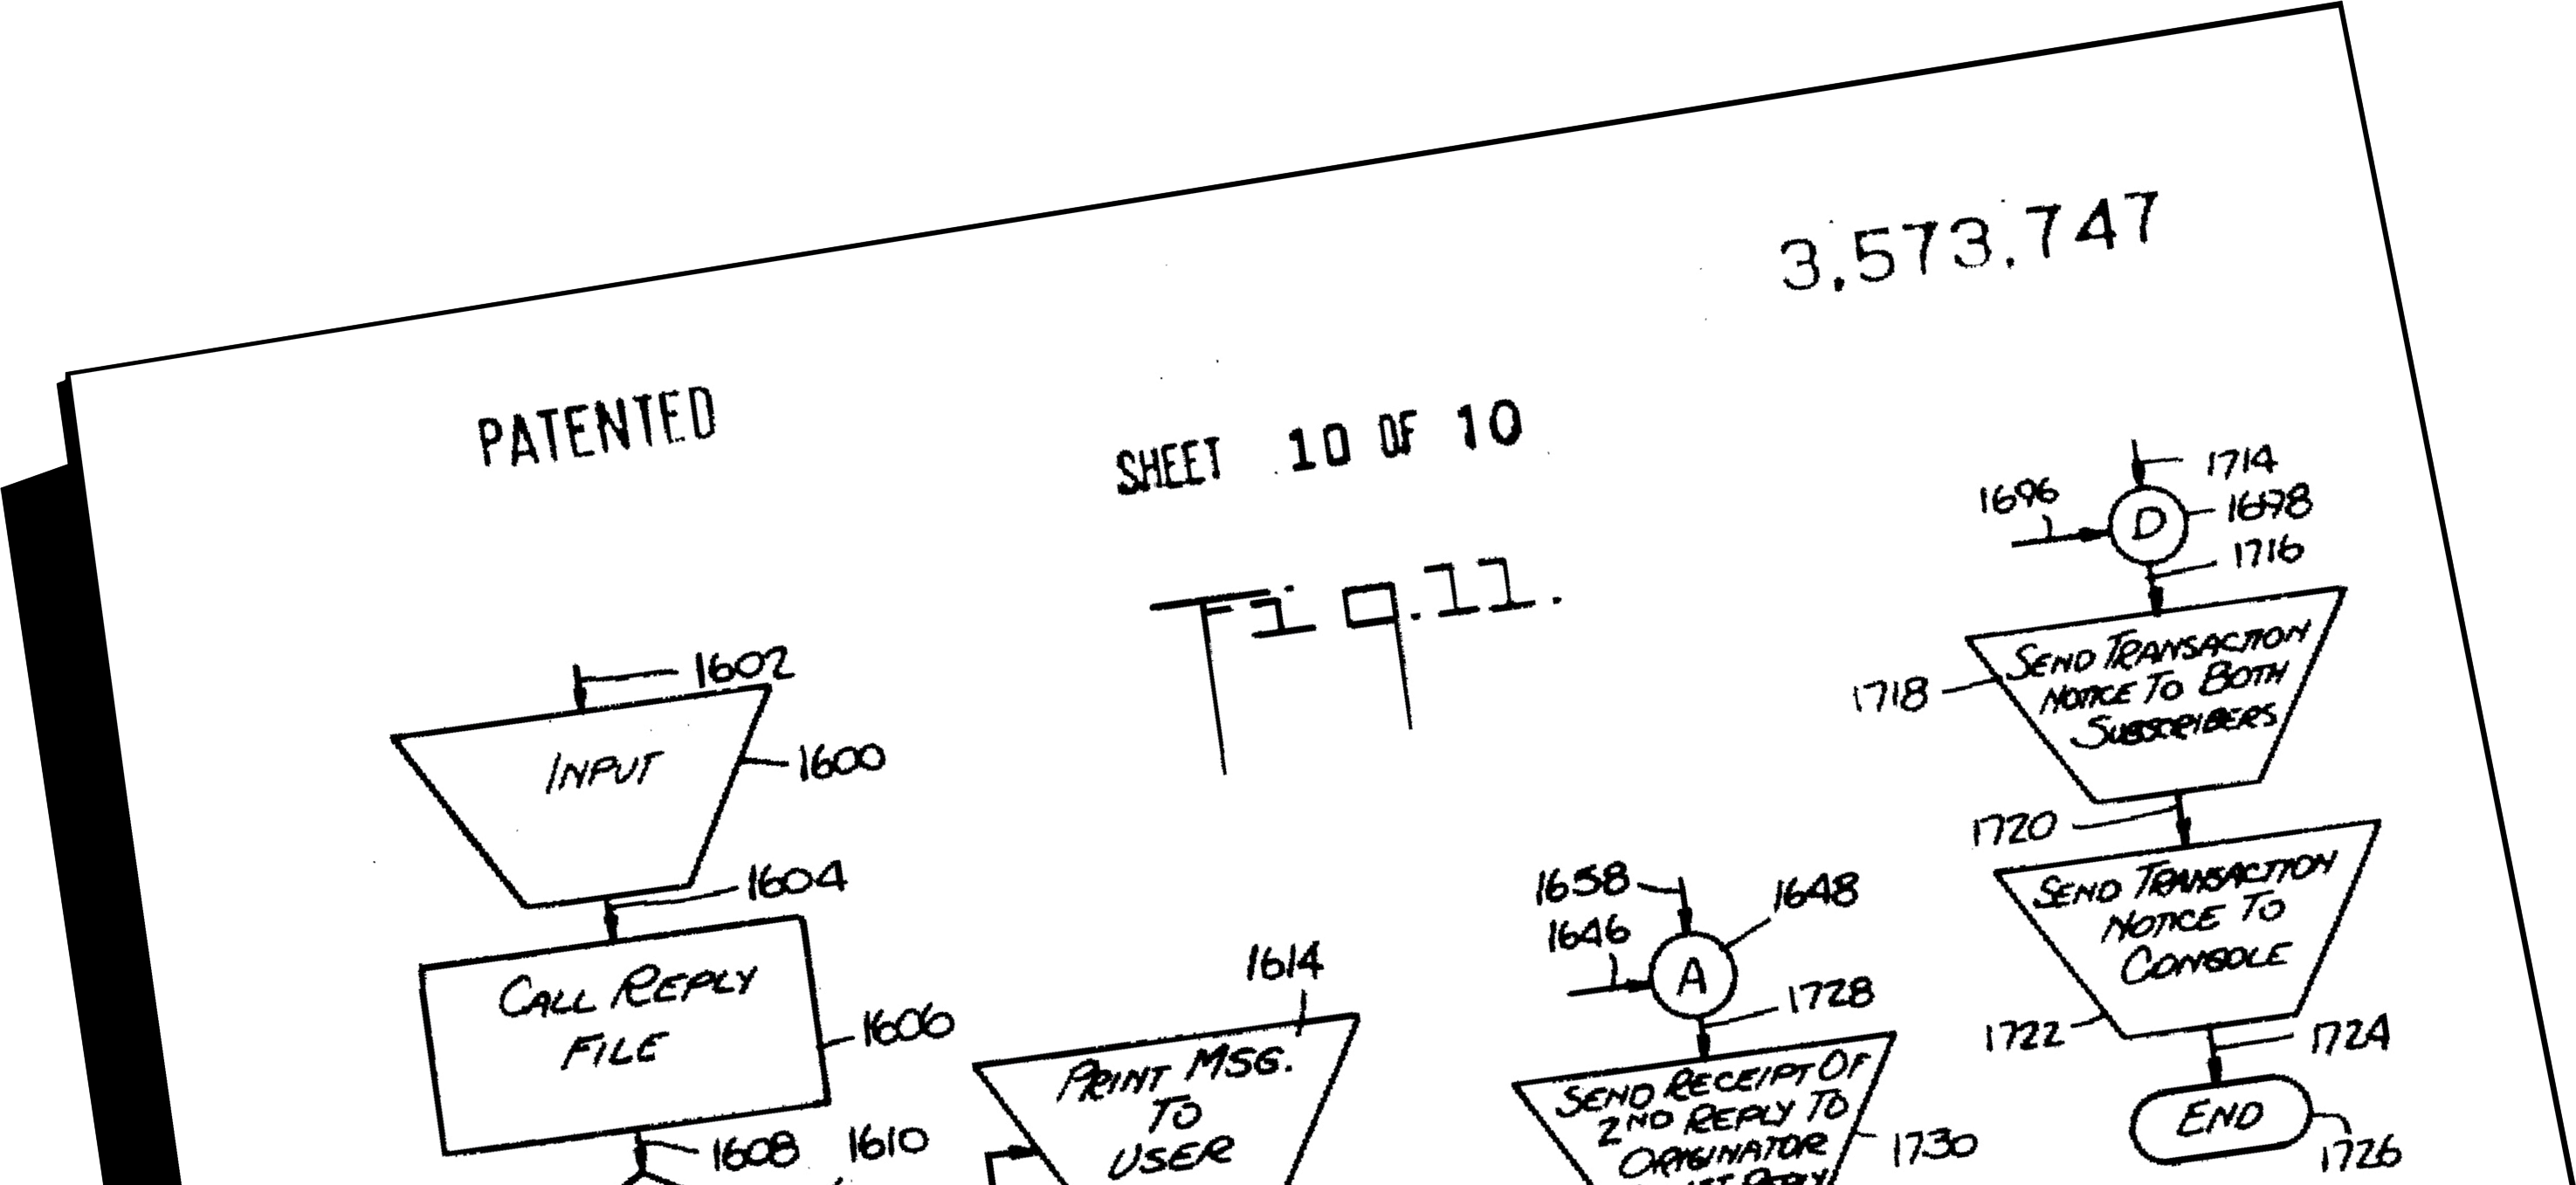 The patent drawing for the Instinet Communications system.